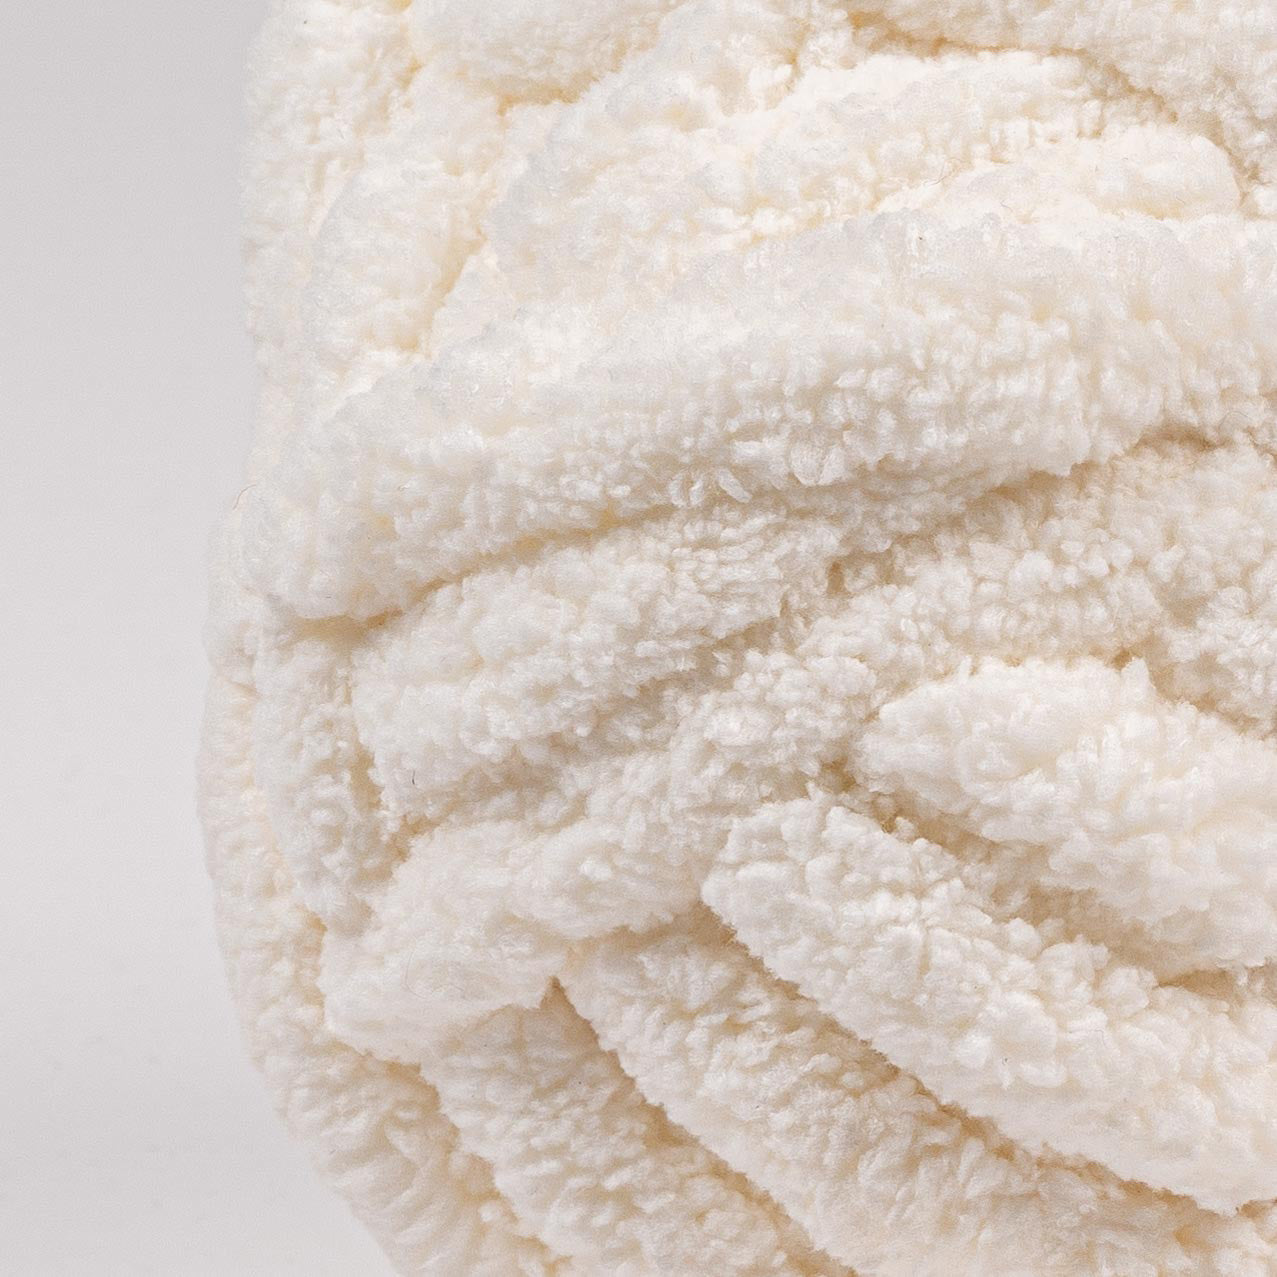 Chunky Chenille – CraftedbyCatherine